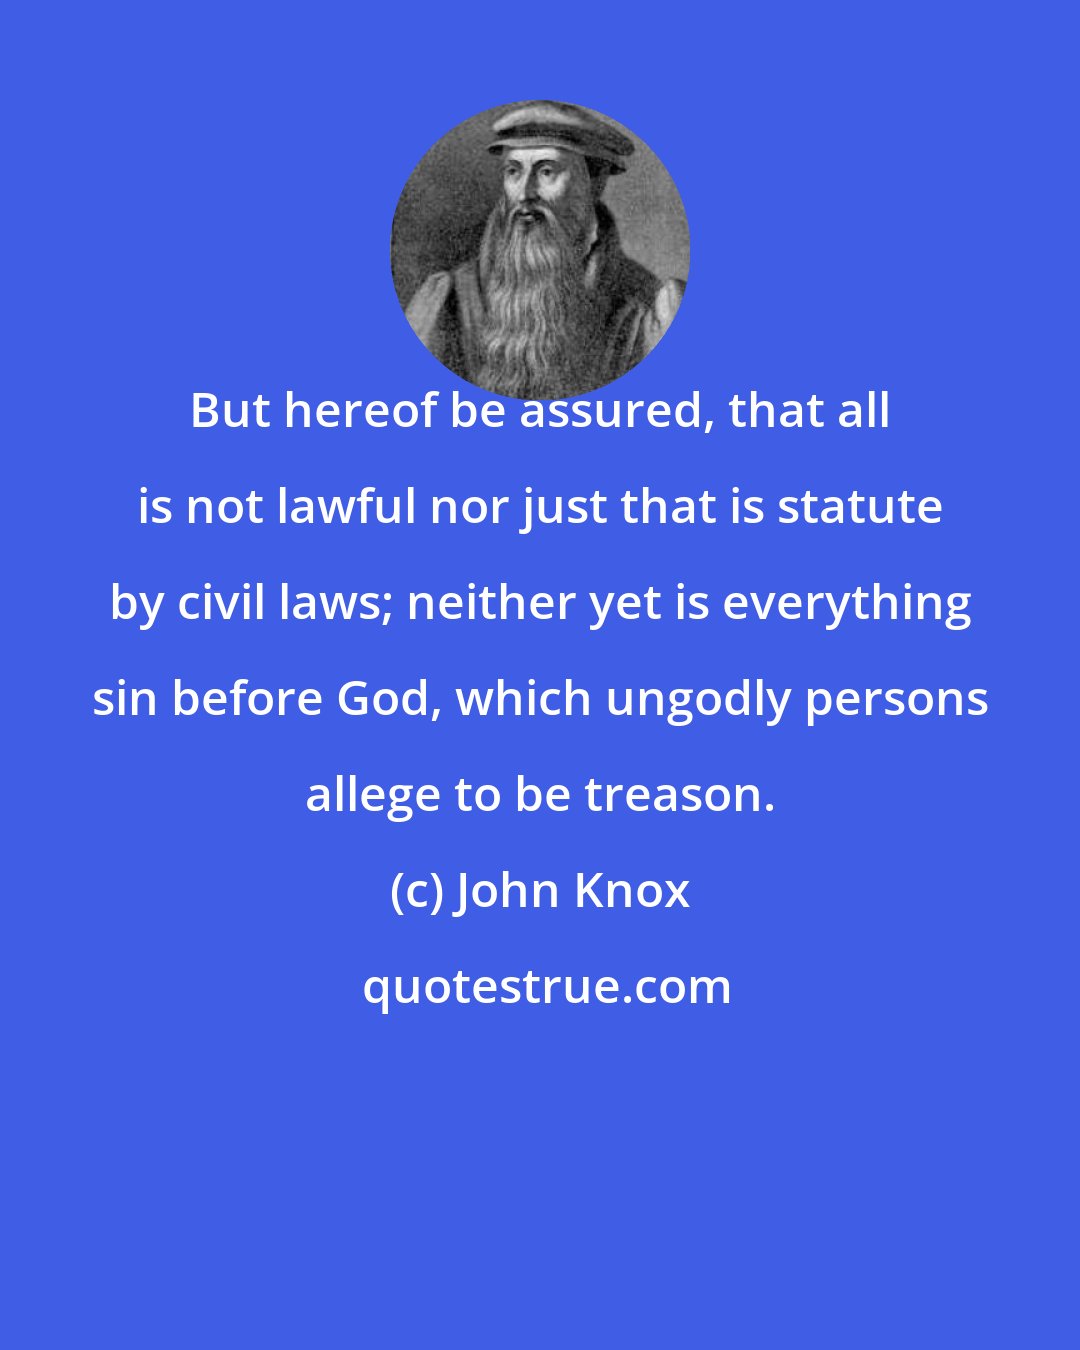 John Knox: But hereof be assured, that all is not lawful nor just that is statute by civil laws; neither yet is everything sin before God, which ungodly persons allege to be treason.